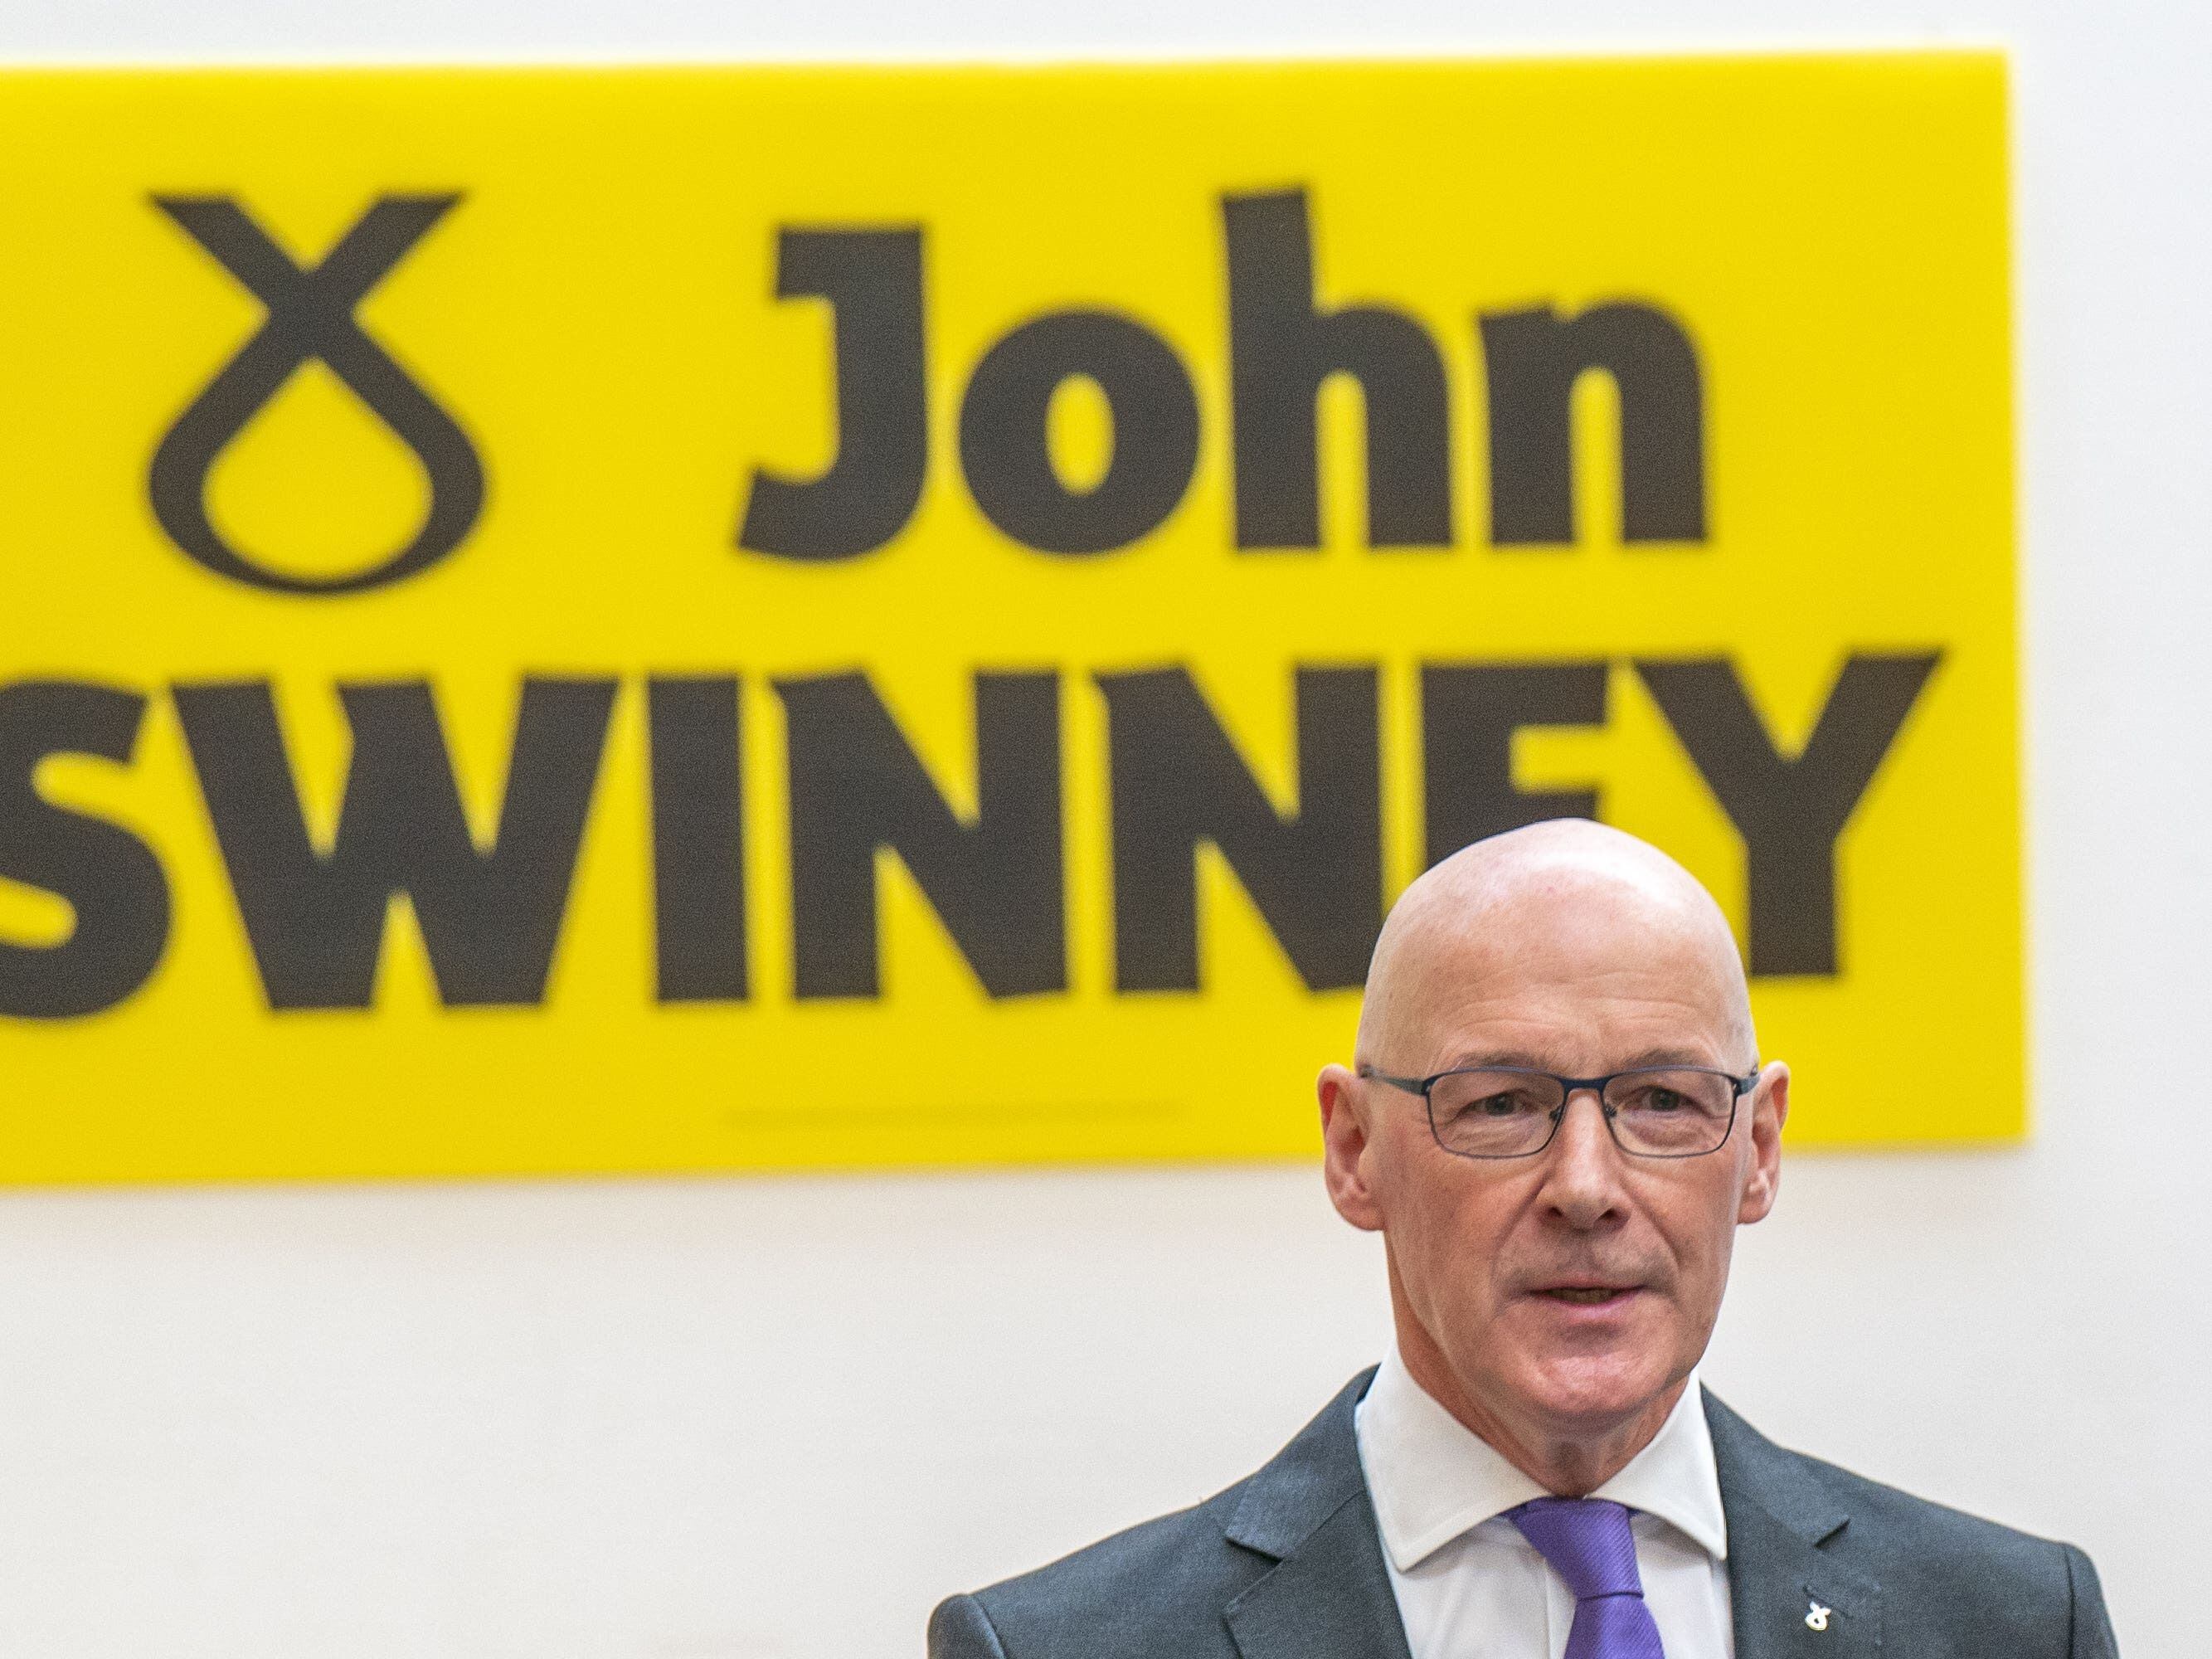 Swinney told to ‘make amends’ to Covid bereaved if he becomes first minister